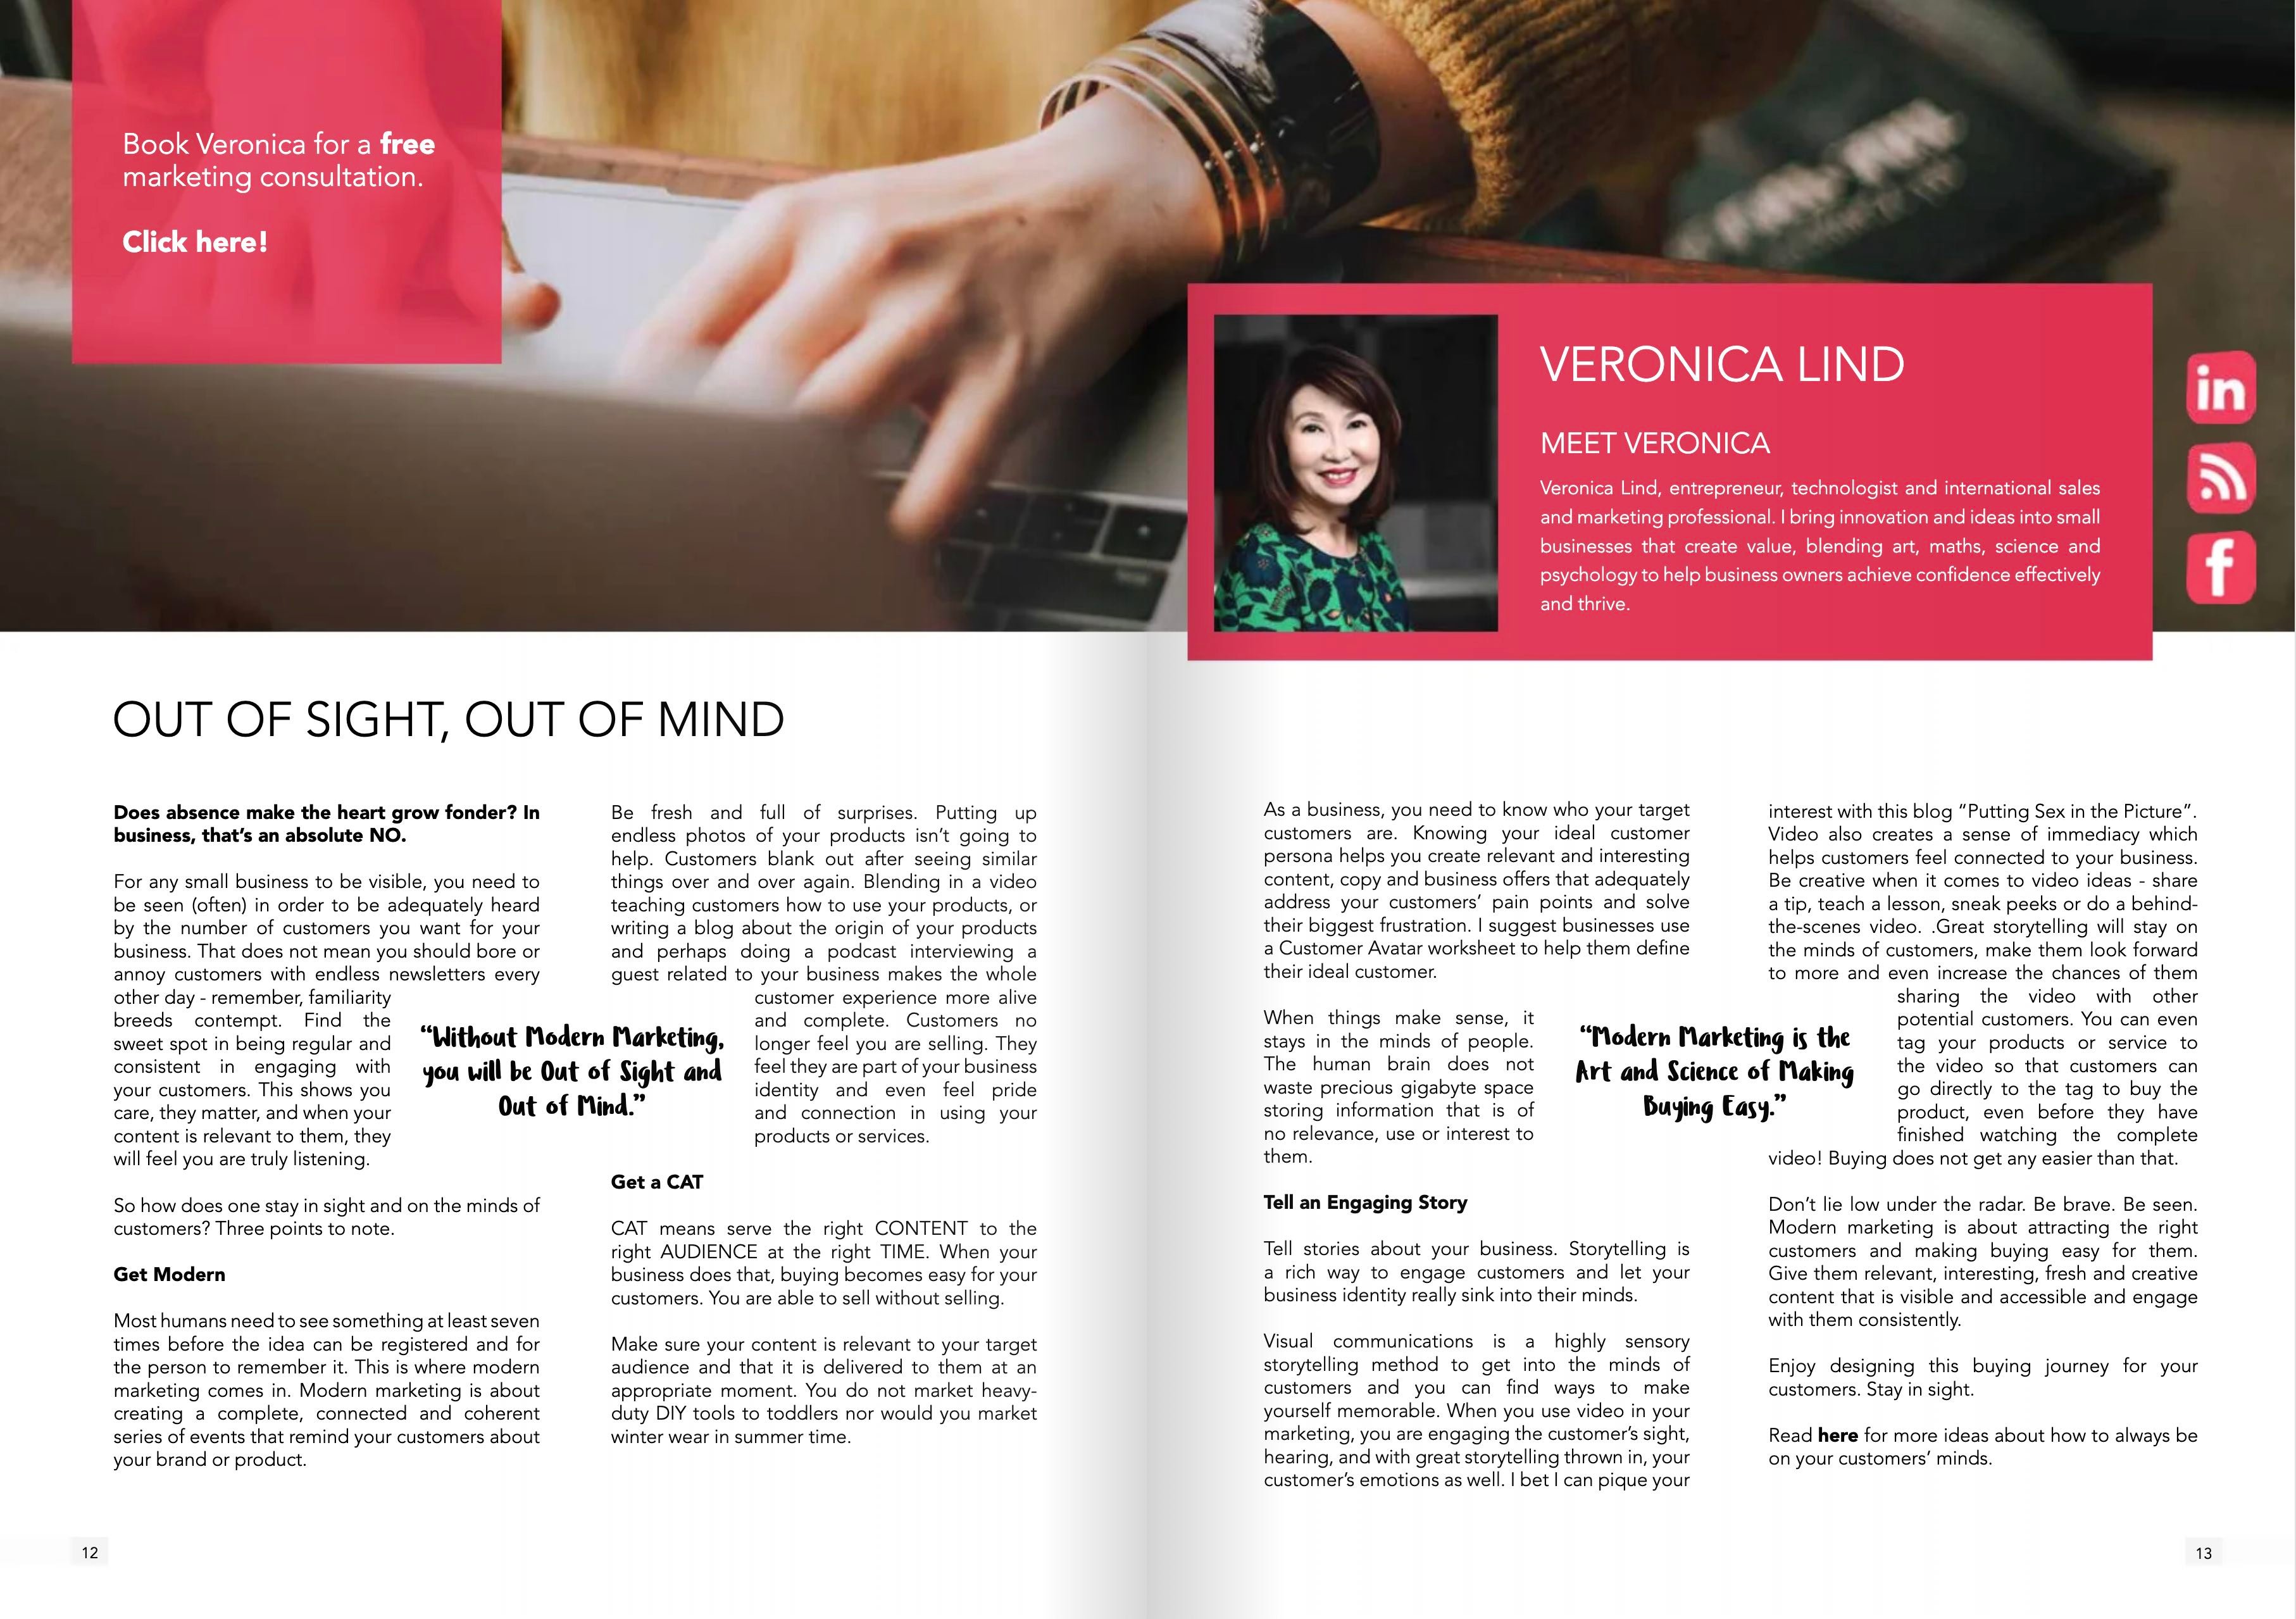 Out of Sight Out of Mind on Business Collective August 2020 issue